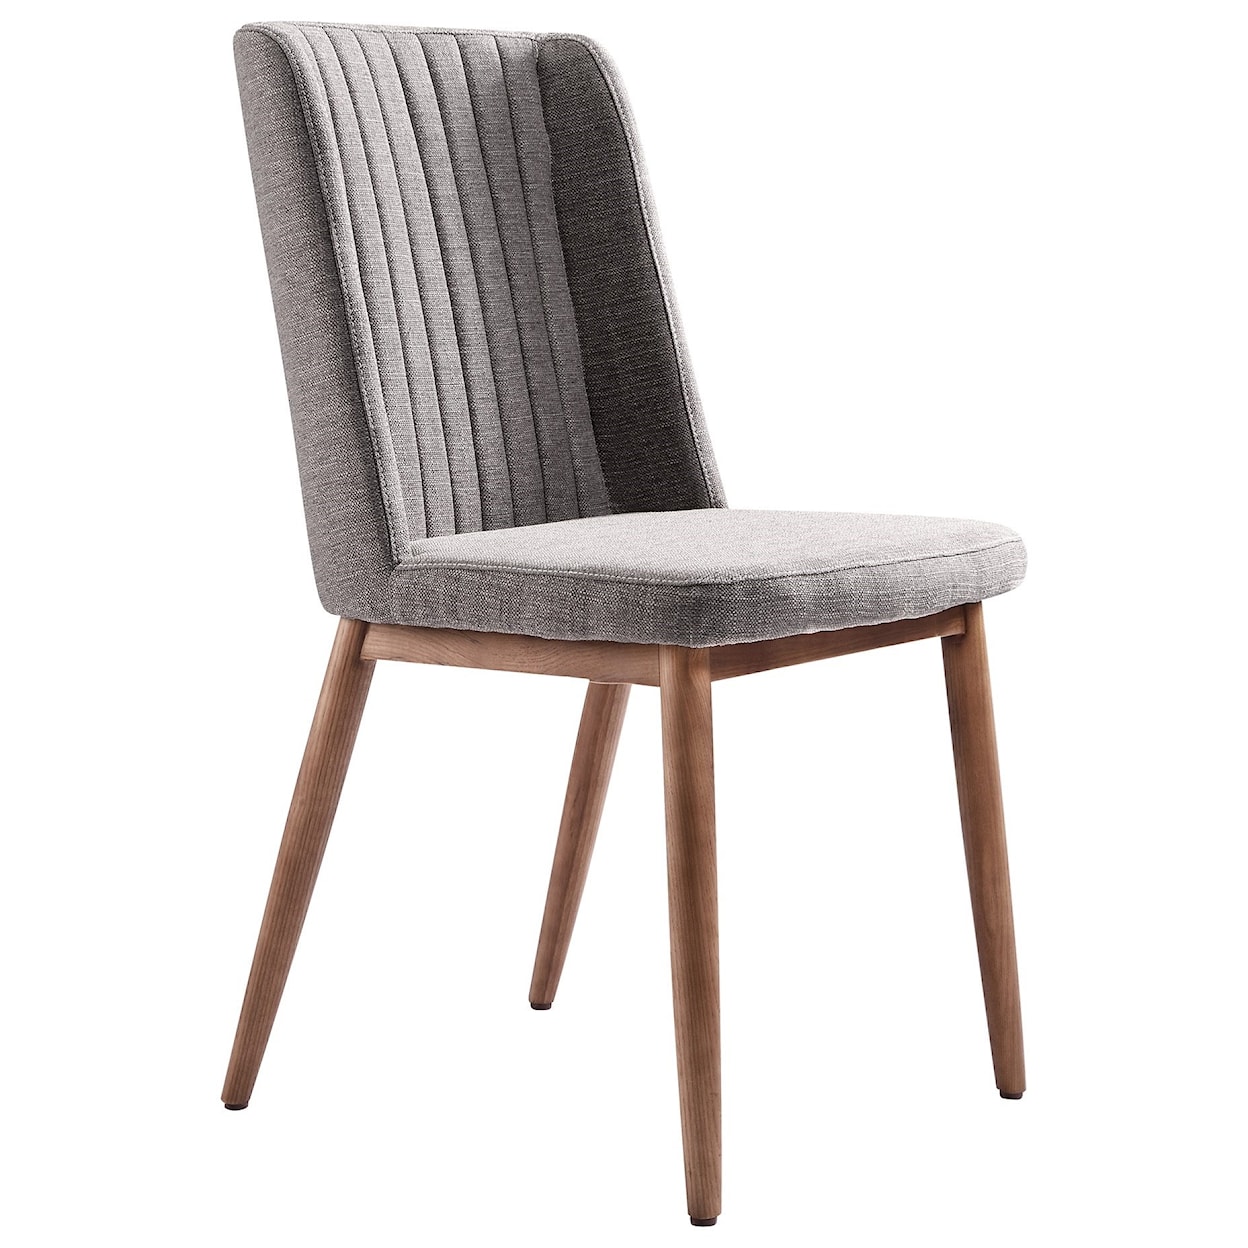 Armen Living Wade Dining Chair - Set of 2